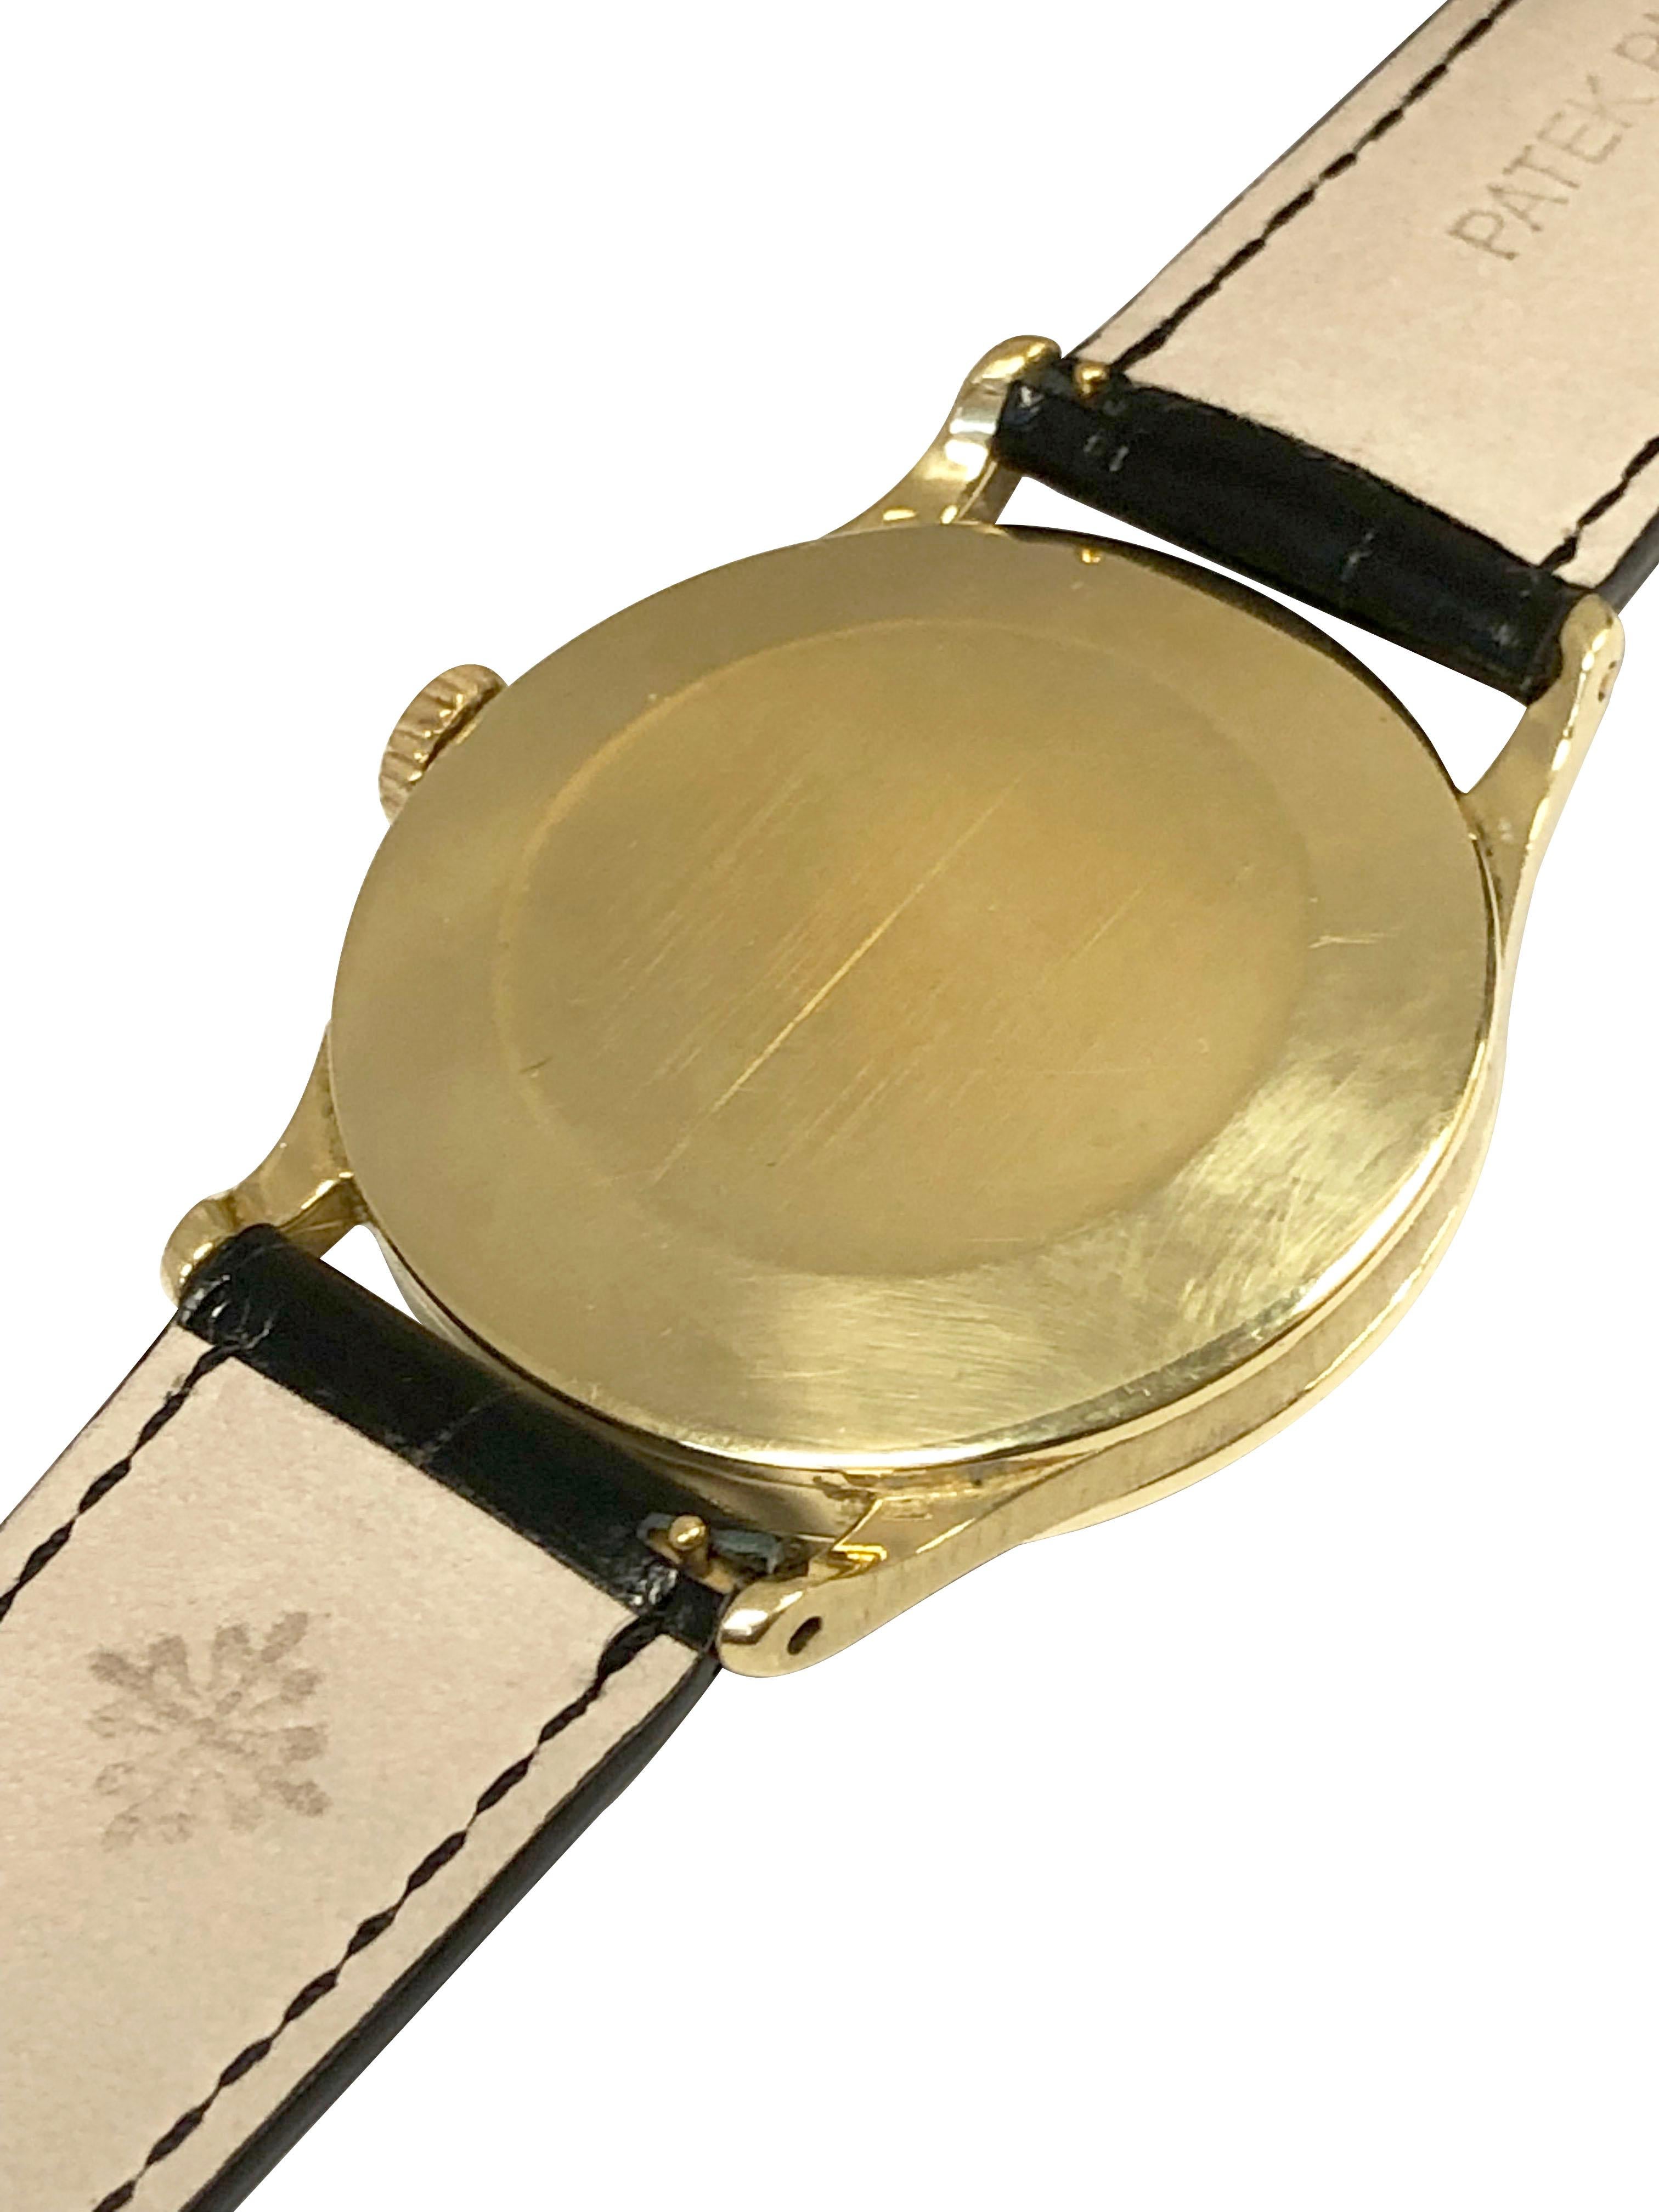 Circa 1960 Reference 570 Patek Philippe Calatrava Wrist Watch, 36 M.M 18k Yellow Gold 3 piece case, 18 jewel mechanical, manual wind movement, Patek Philippe logo crown, original, near excellent silver Satin dial with raised Gold markers and a sweep